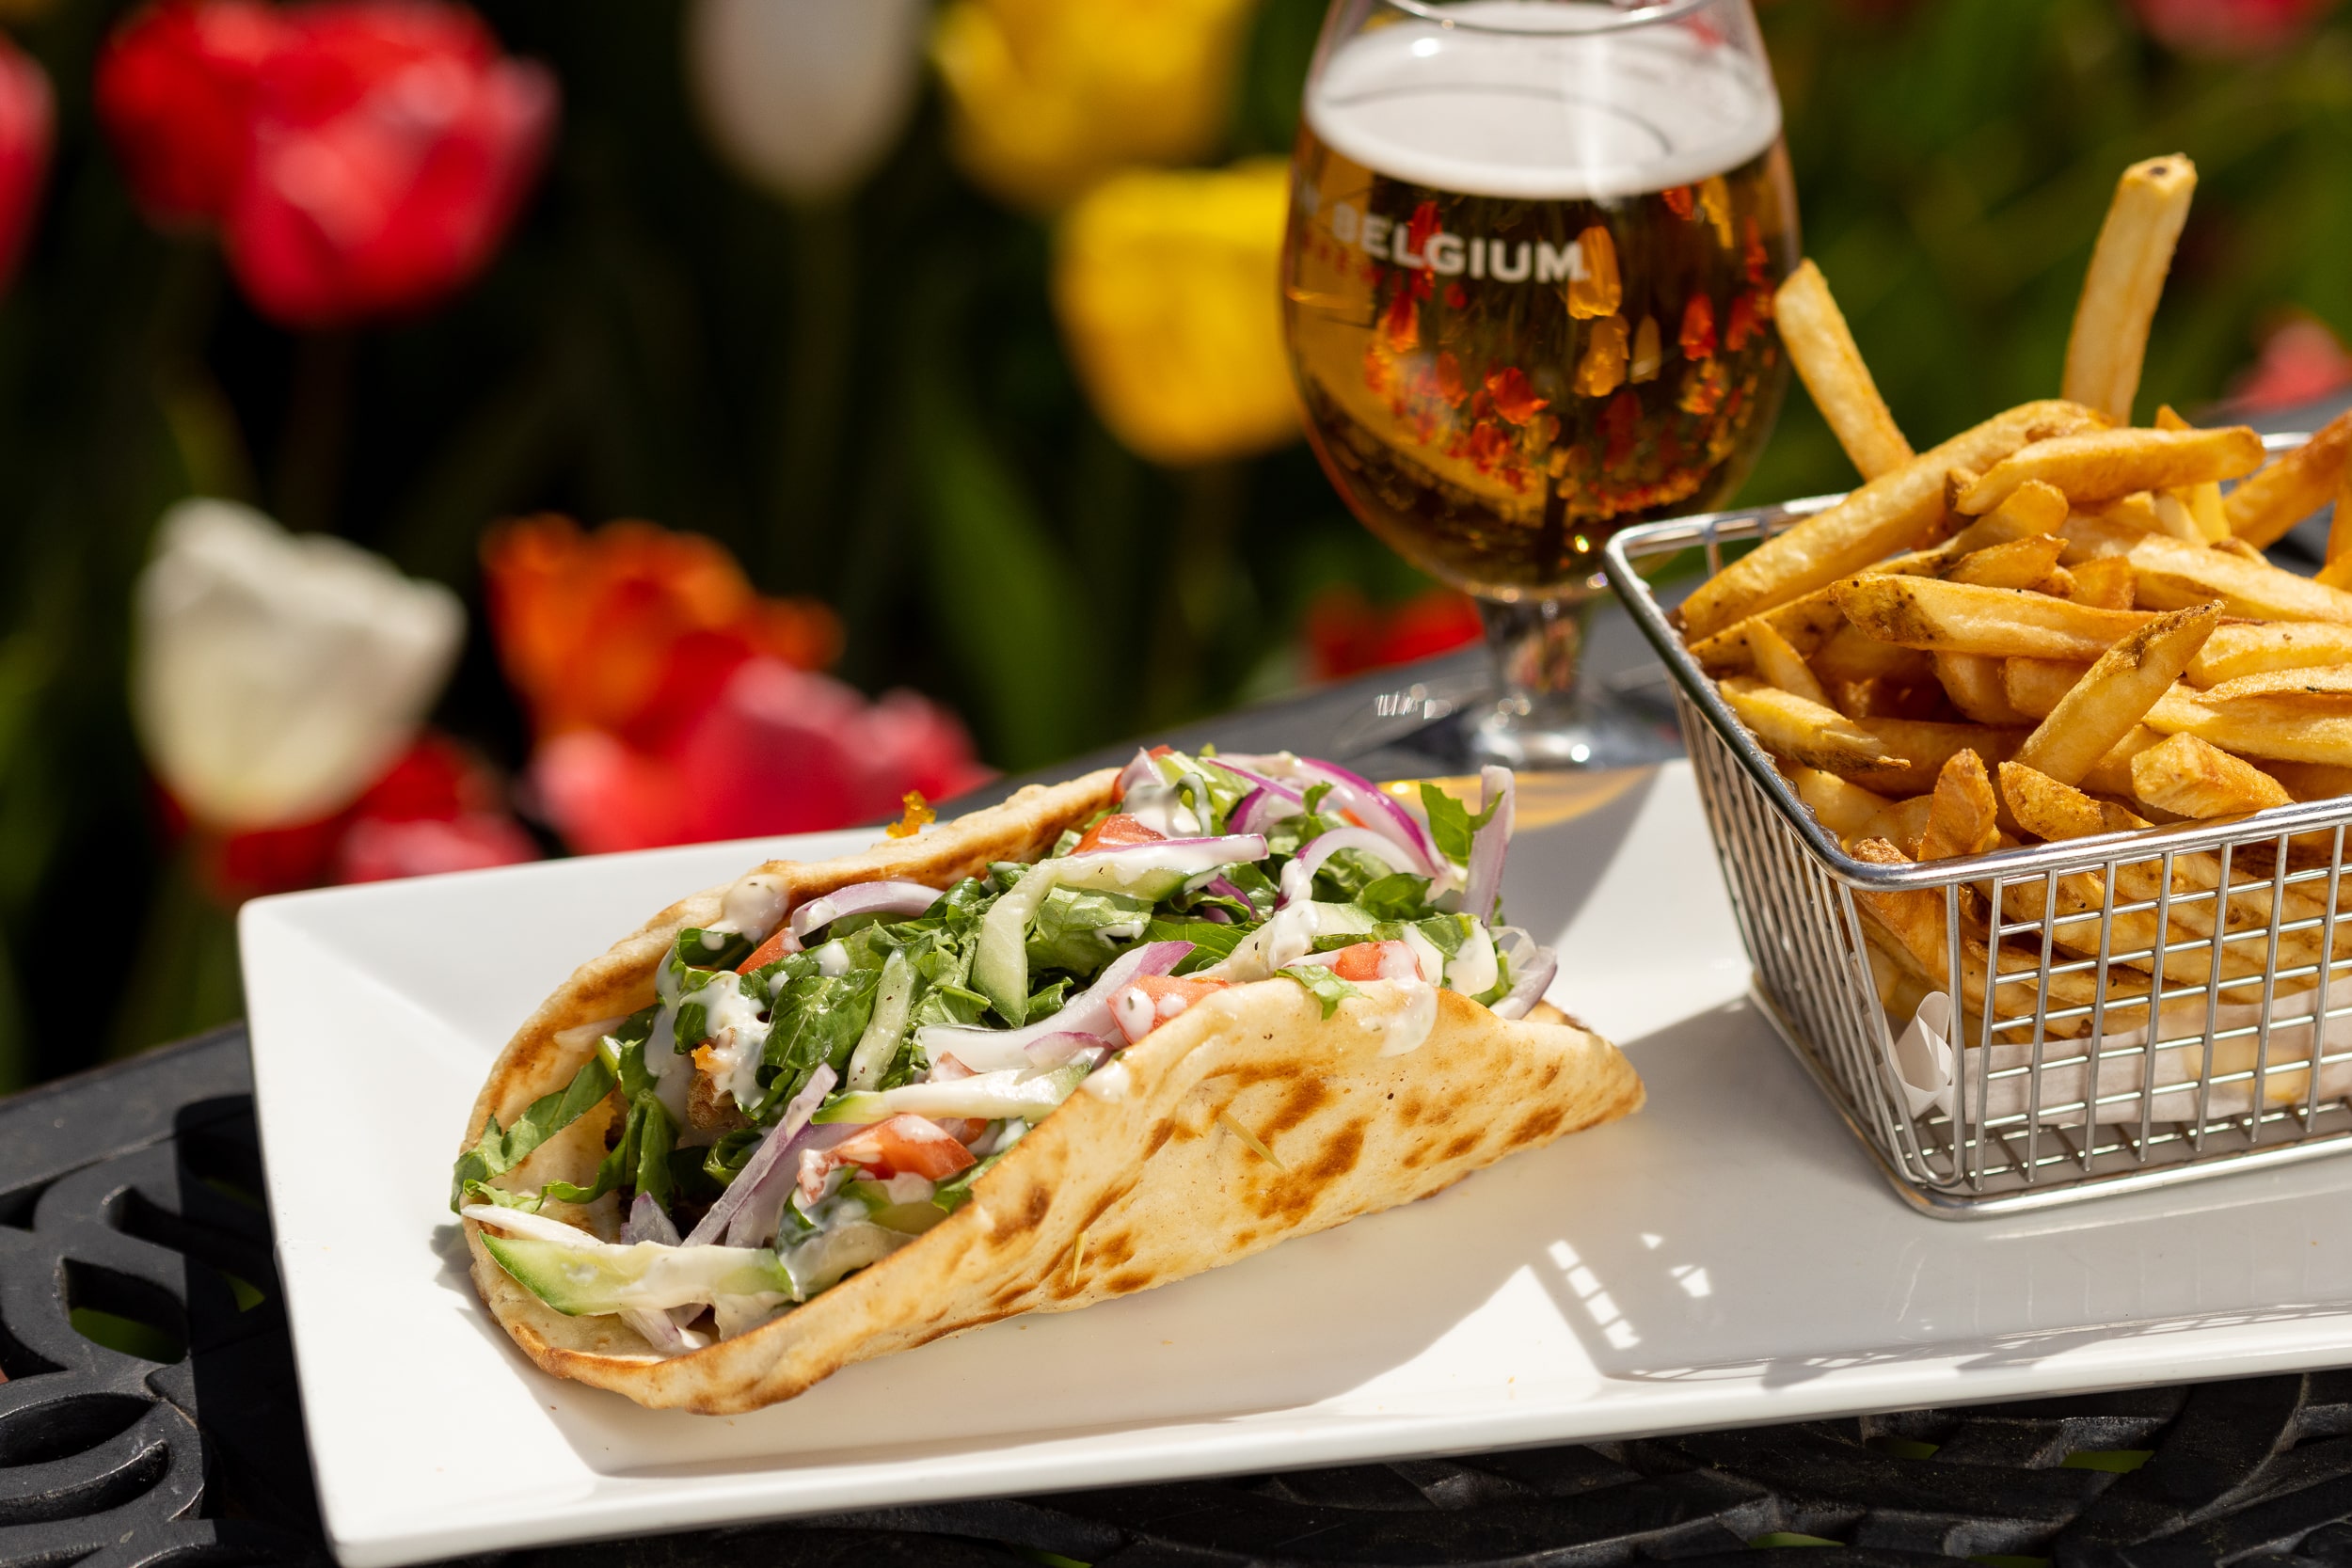 pita, fries in a basket and glass of beer on a plate outside on a table